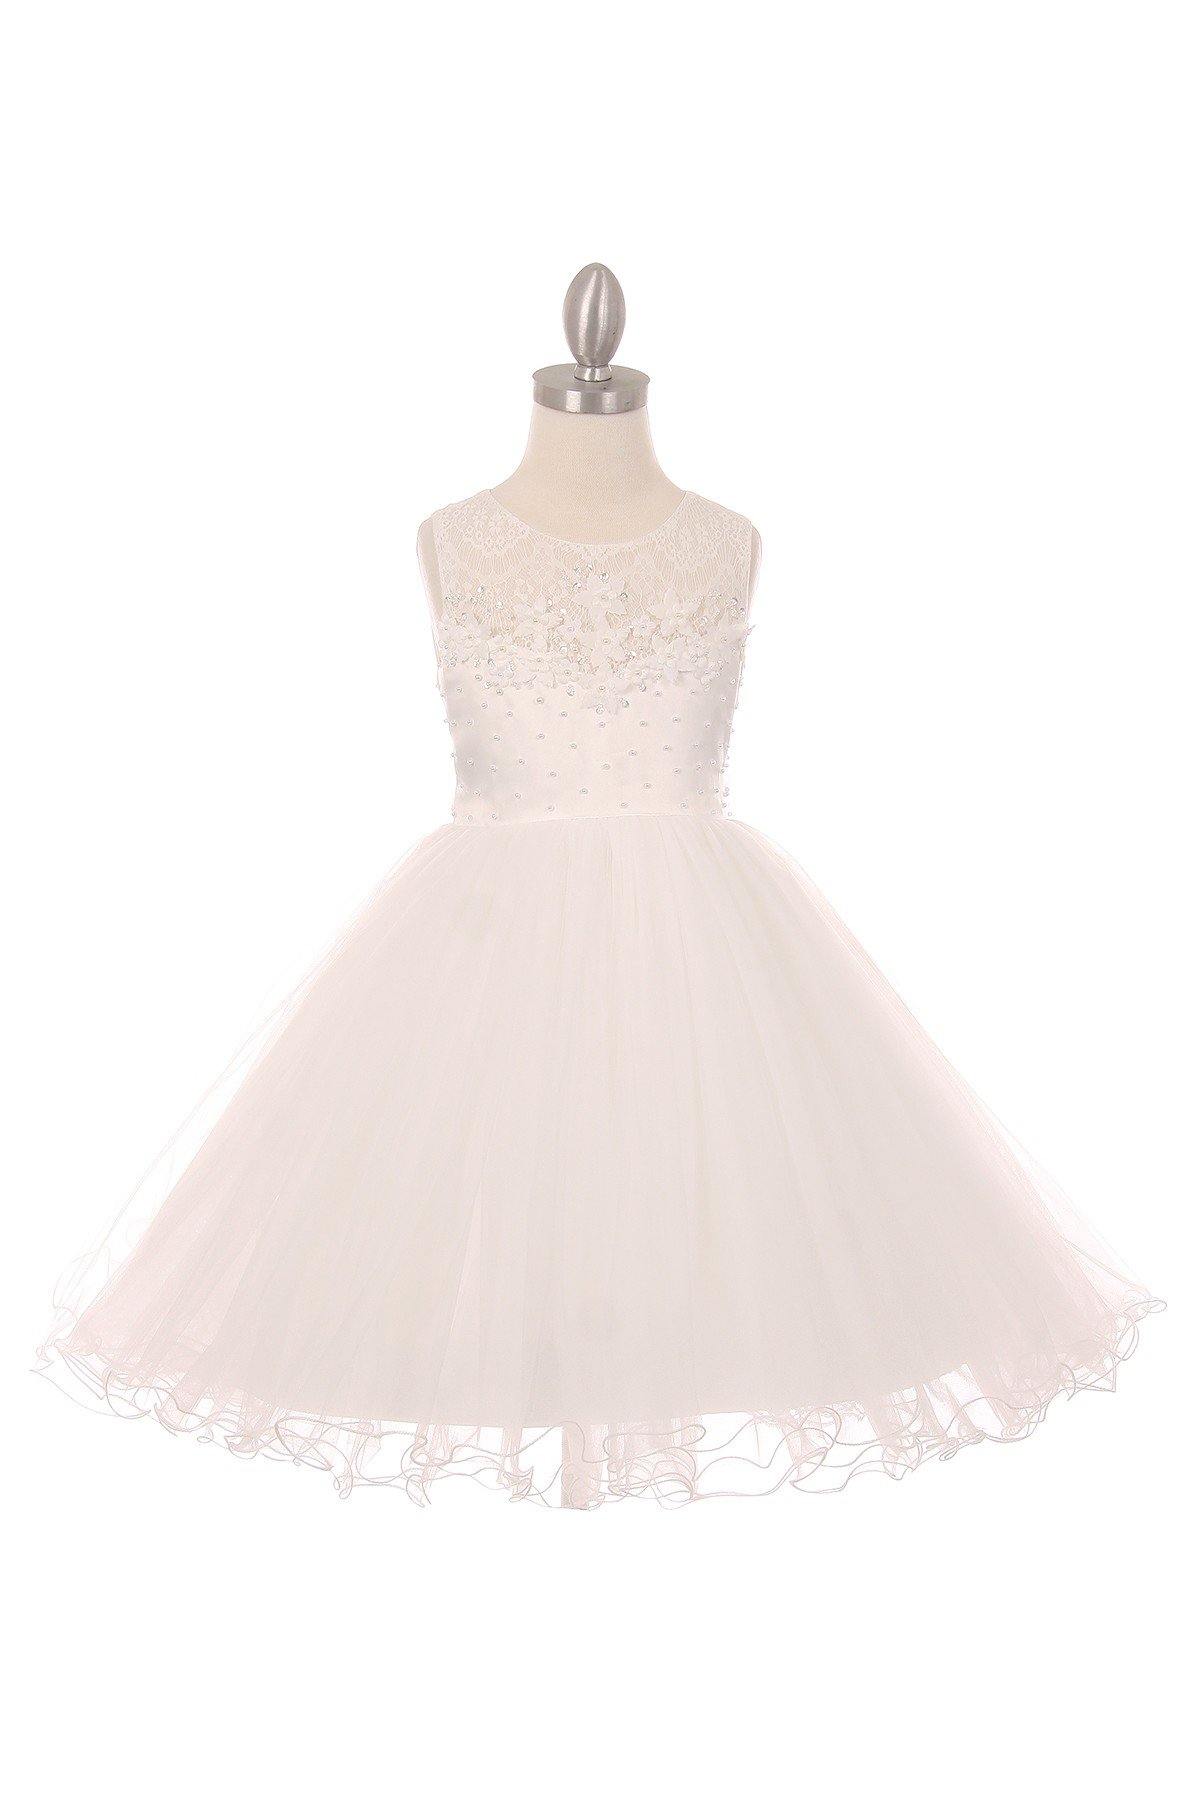 Short Embellished Gown Flowers Girl Dress - The Dress Outlet Cinderella Couture